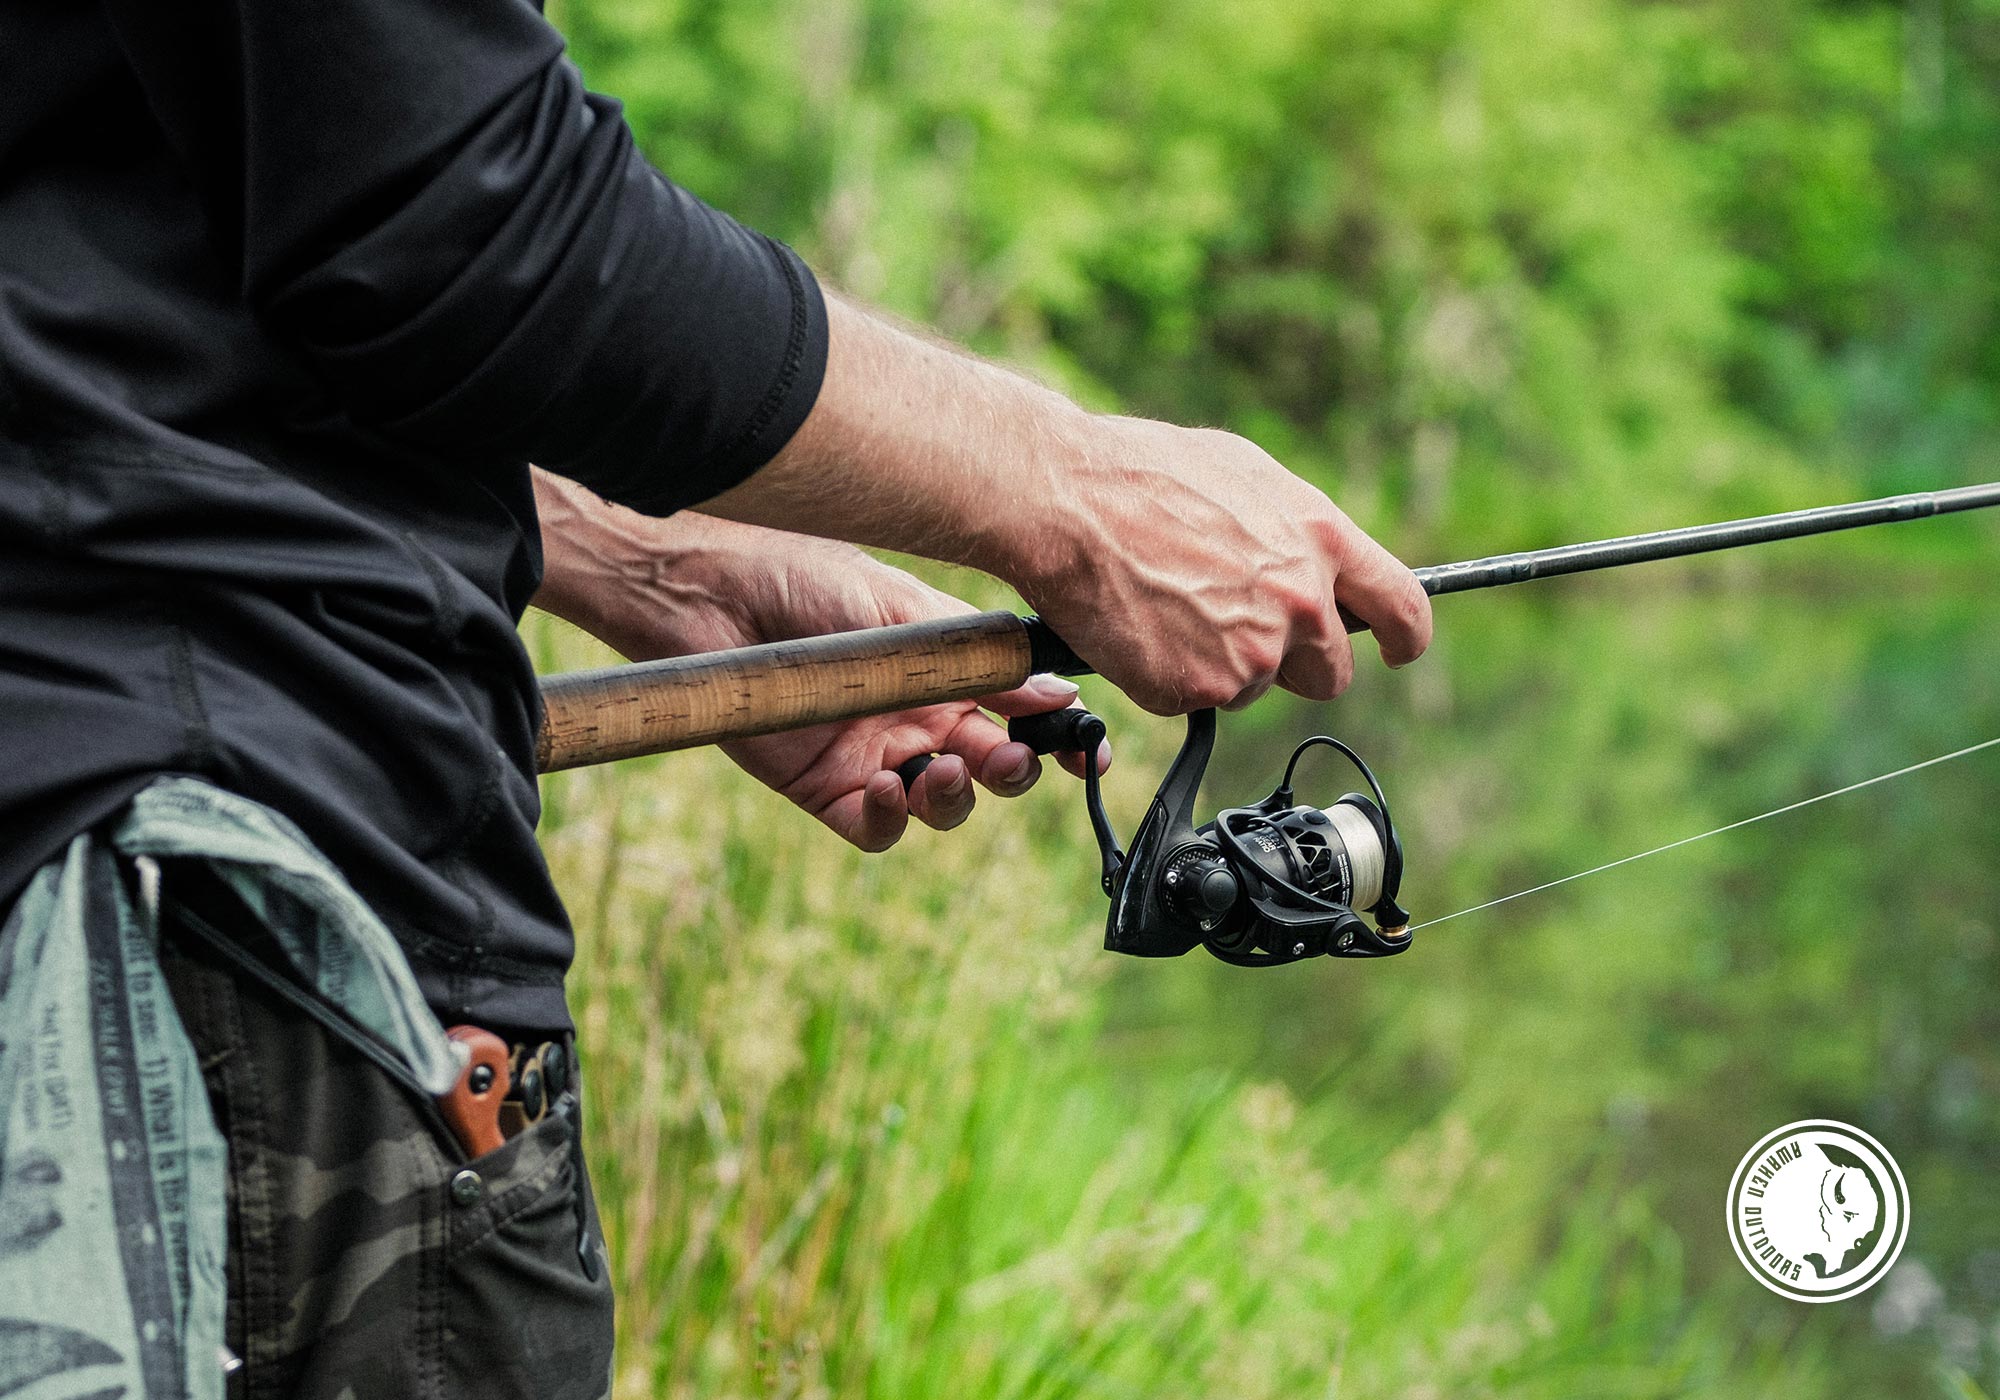 Bank Fishing 101: Tips and Tricks to Successfully Catch Fish from the Banks